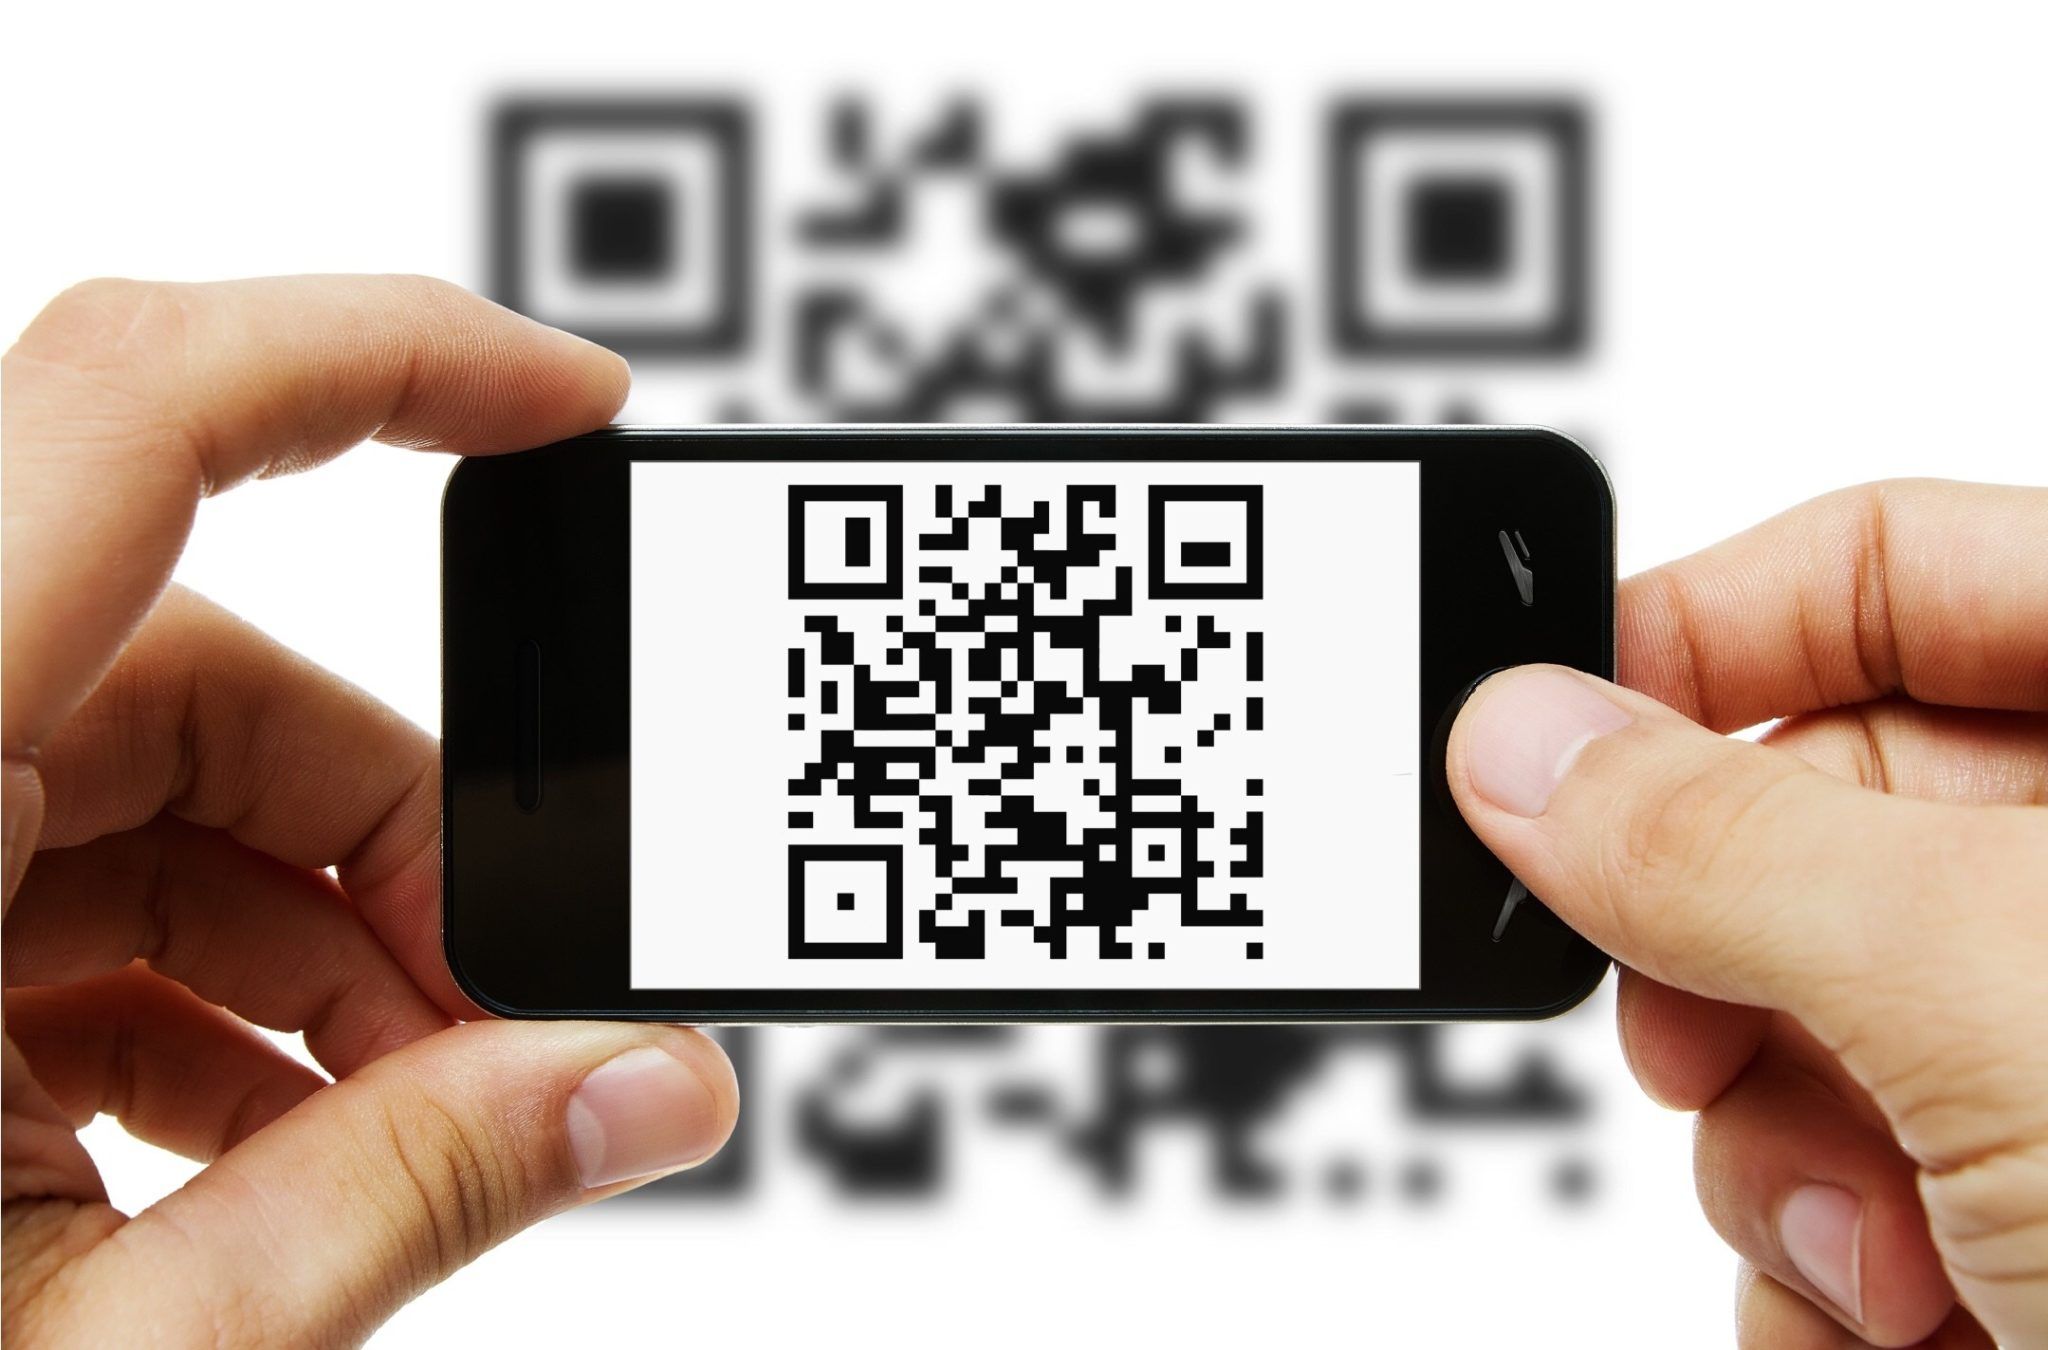 Enhancing Real Estate Broker Contact List Visibility with QR Codes